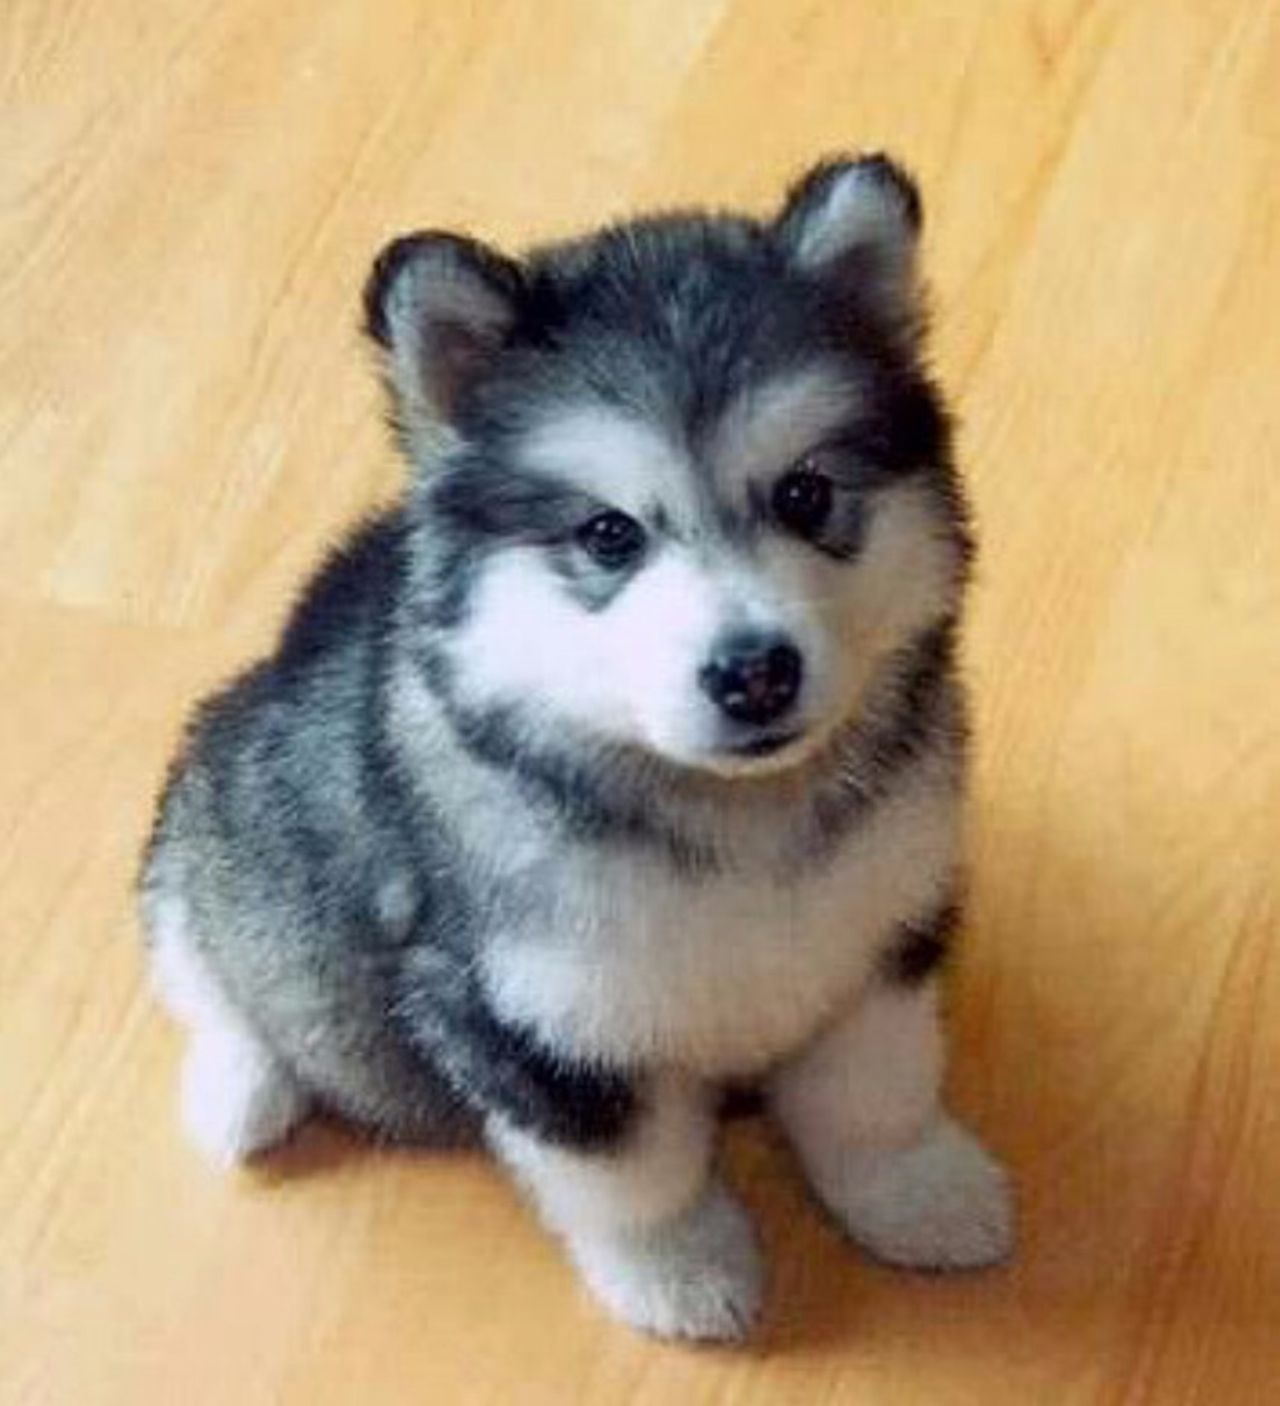 What are some interesting facts about husky dogs?